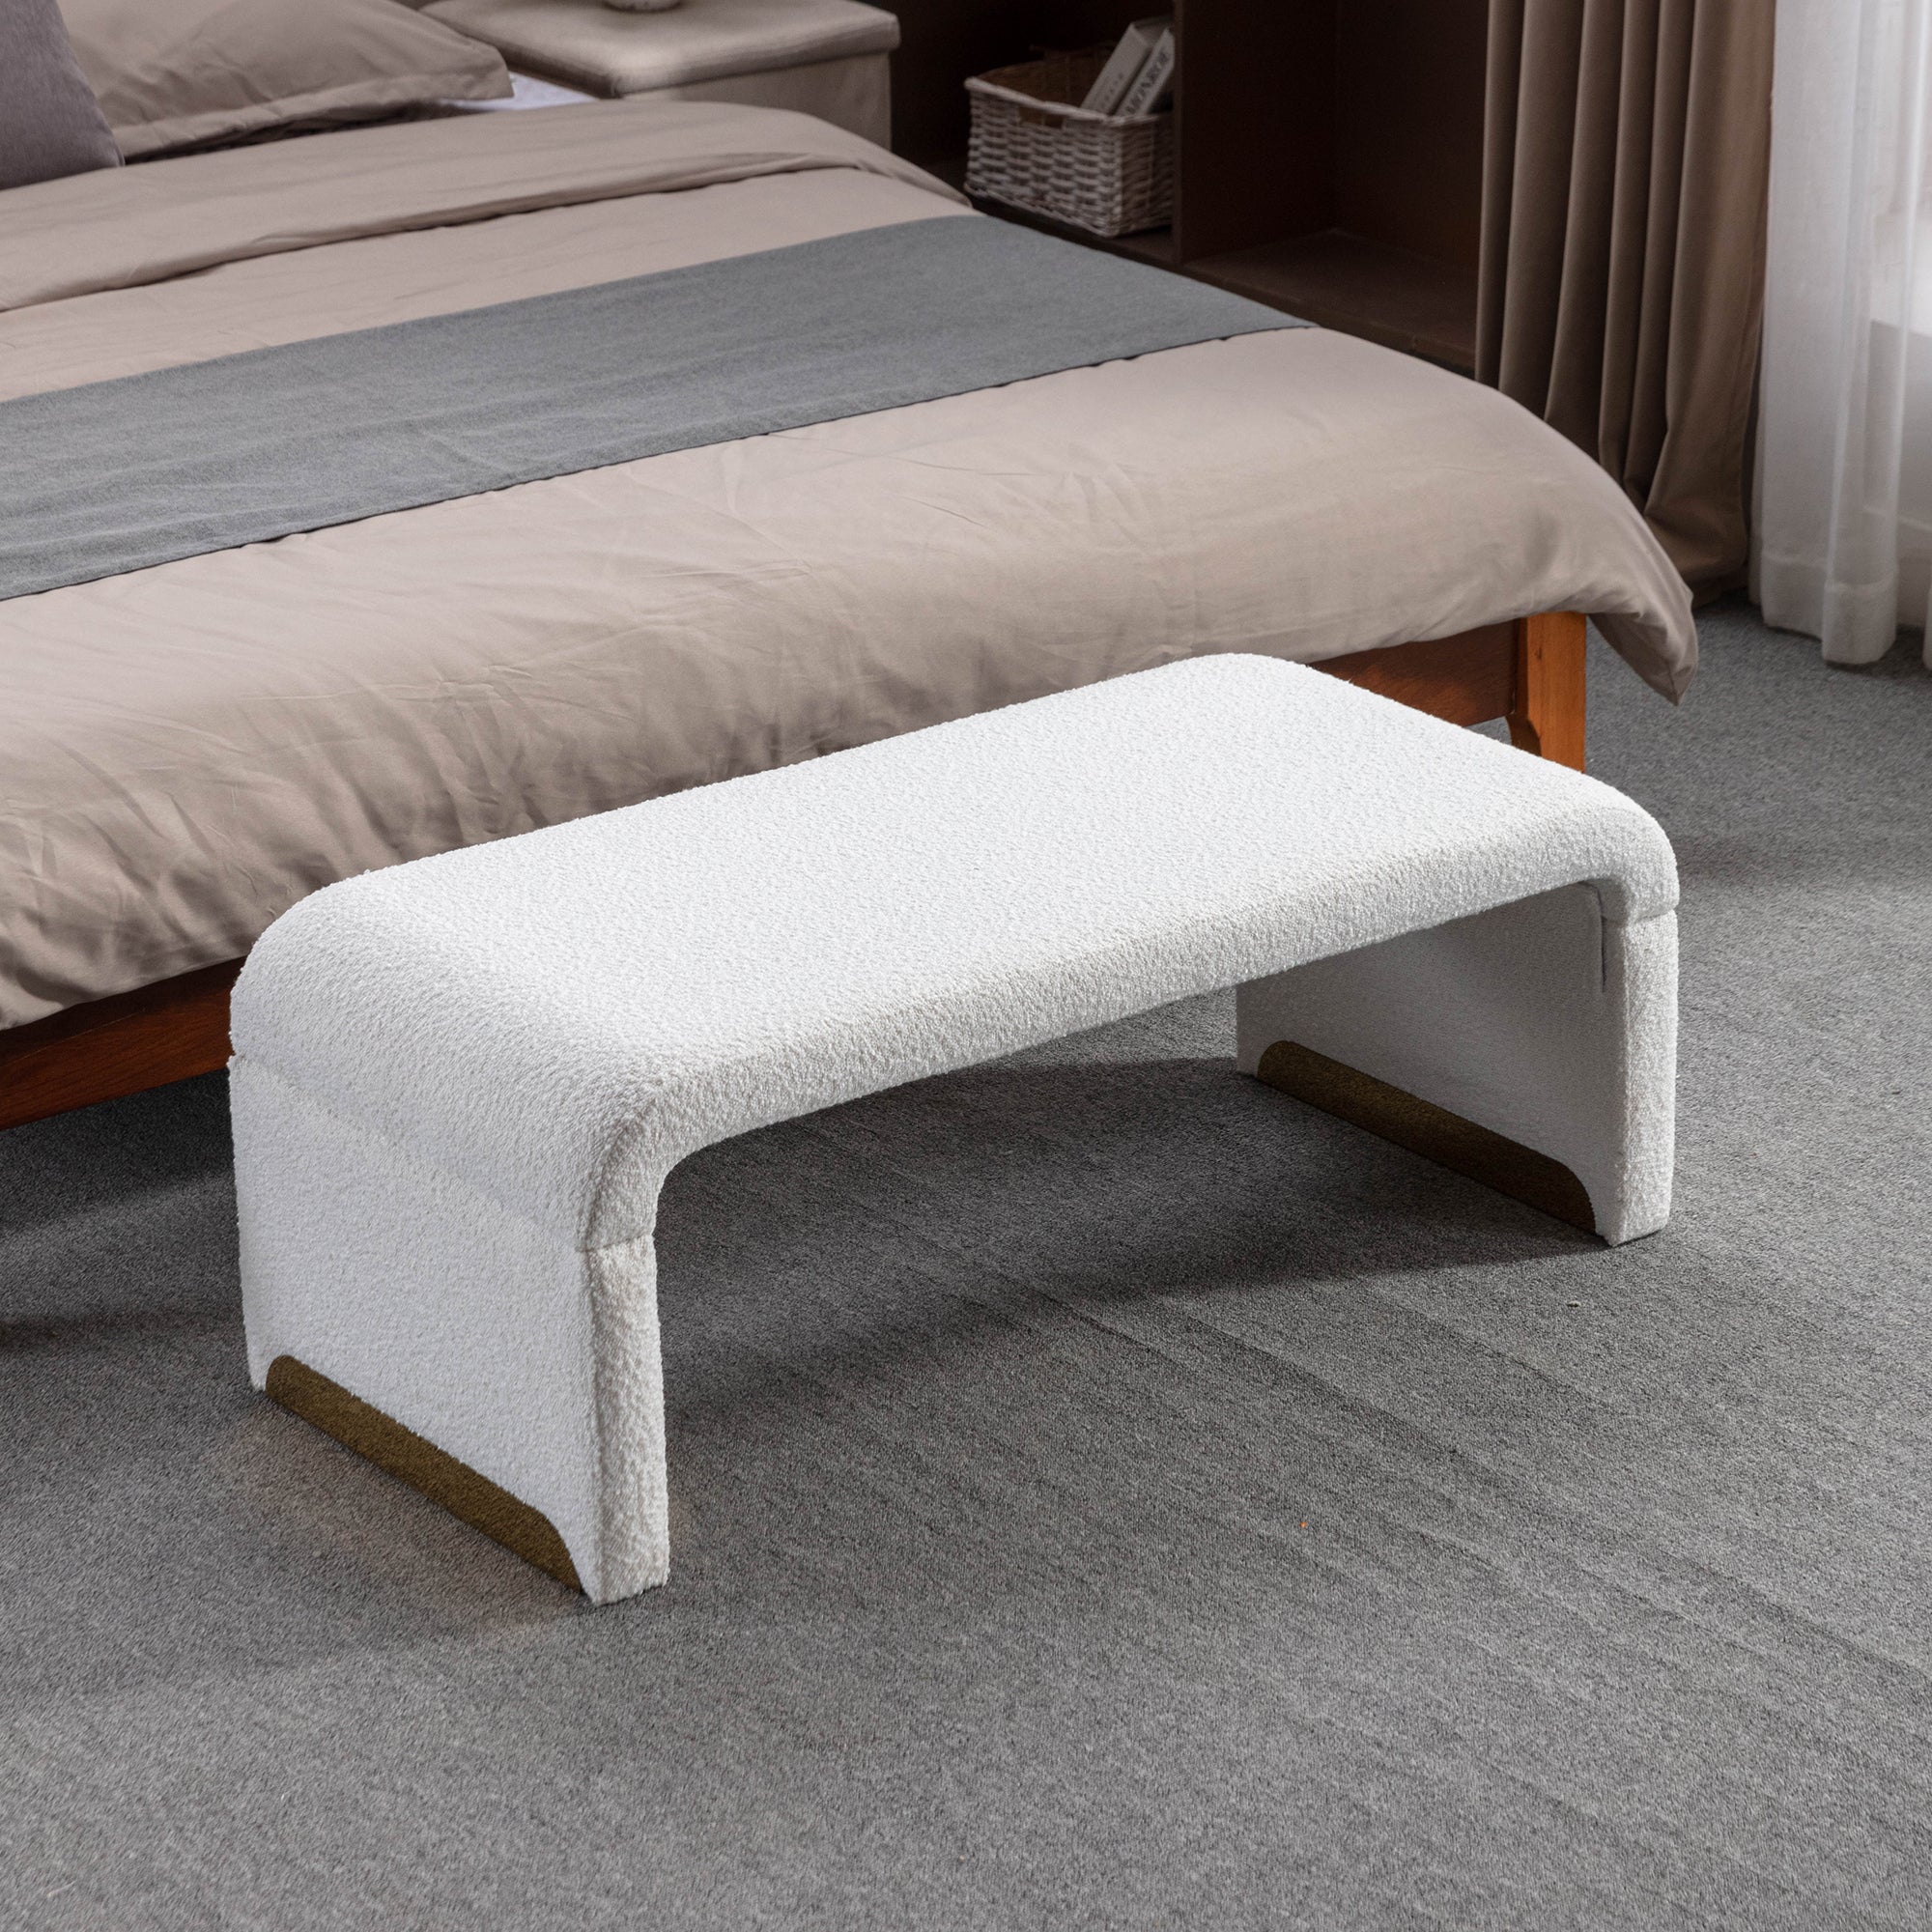 Boucle Fabric Footstool Bedroom Bench With Gold Metal Legs - Ivory White